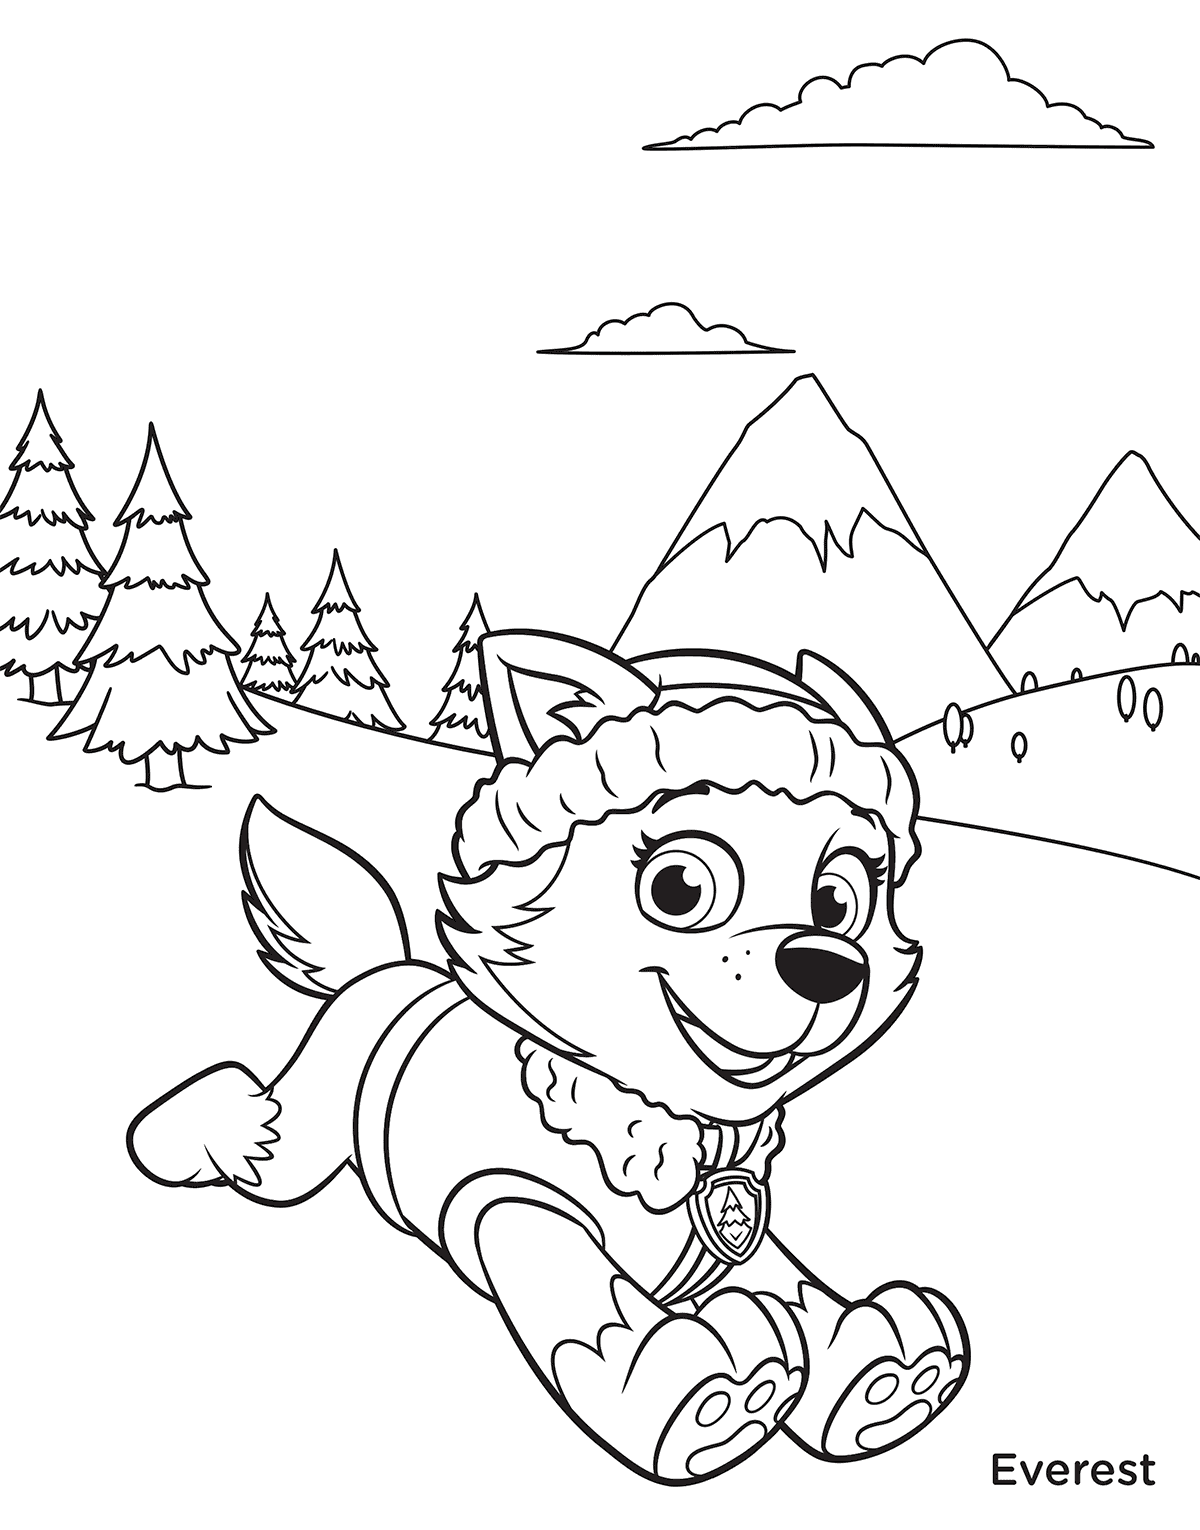 Everest Paw Patrol Coloring Page